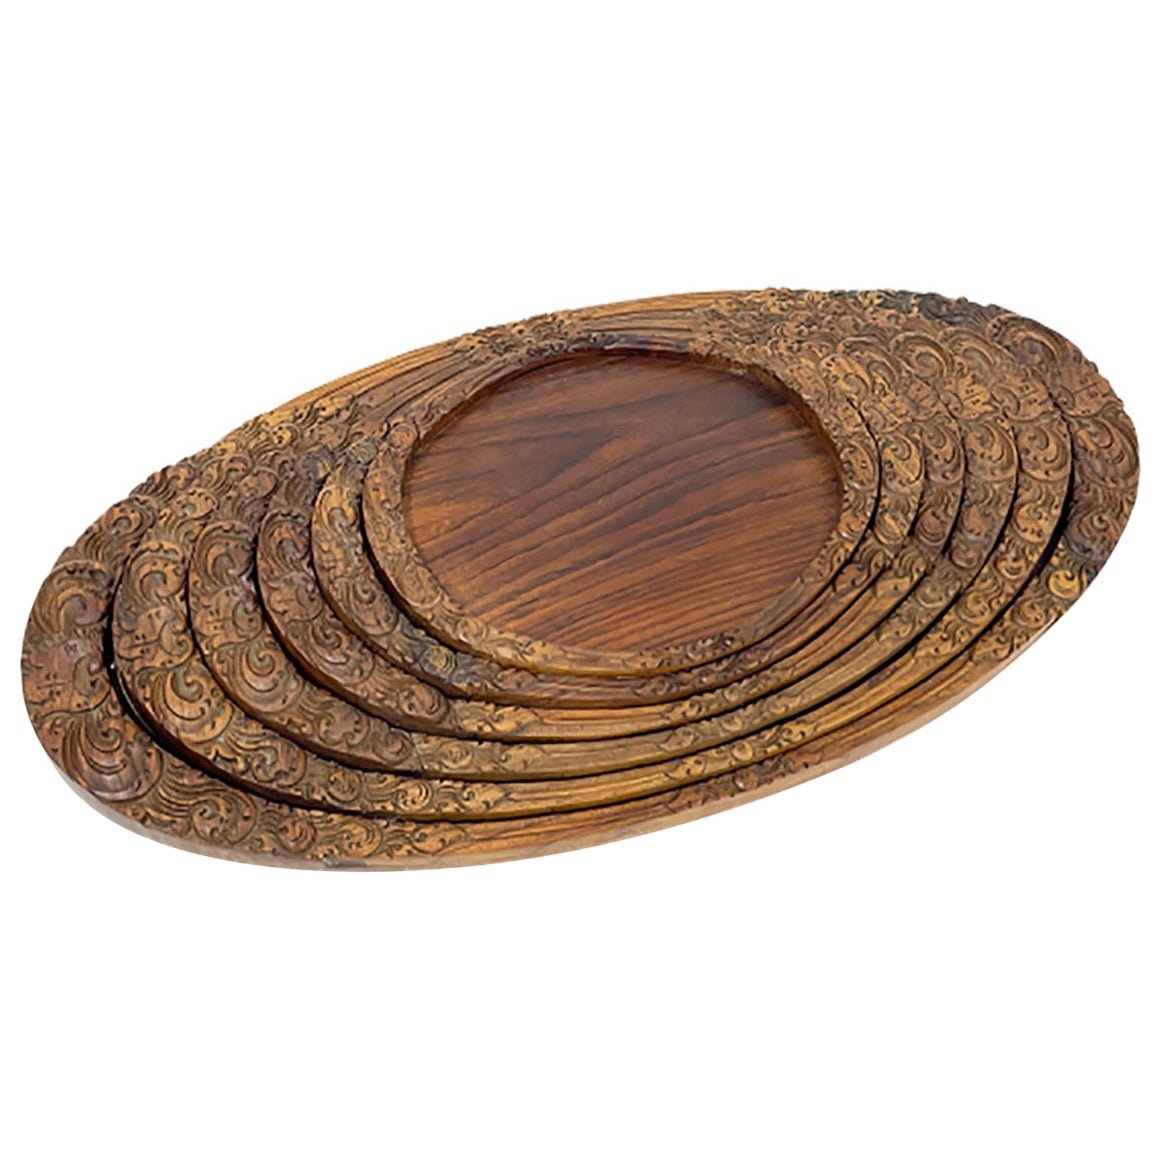 Serving Plates choose from selection Fair Trade Indonesian Wooden Dinner 